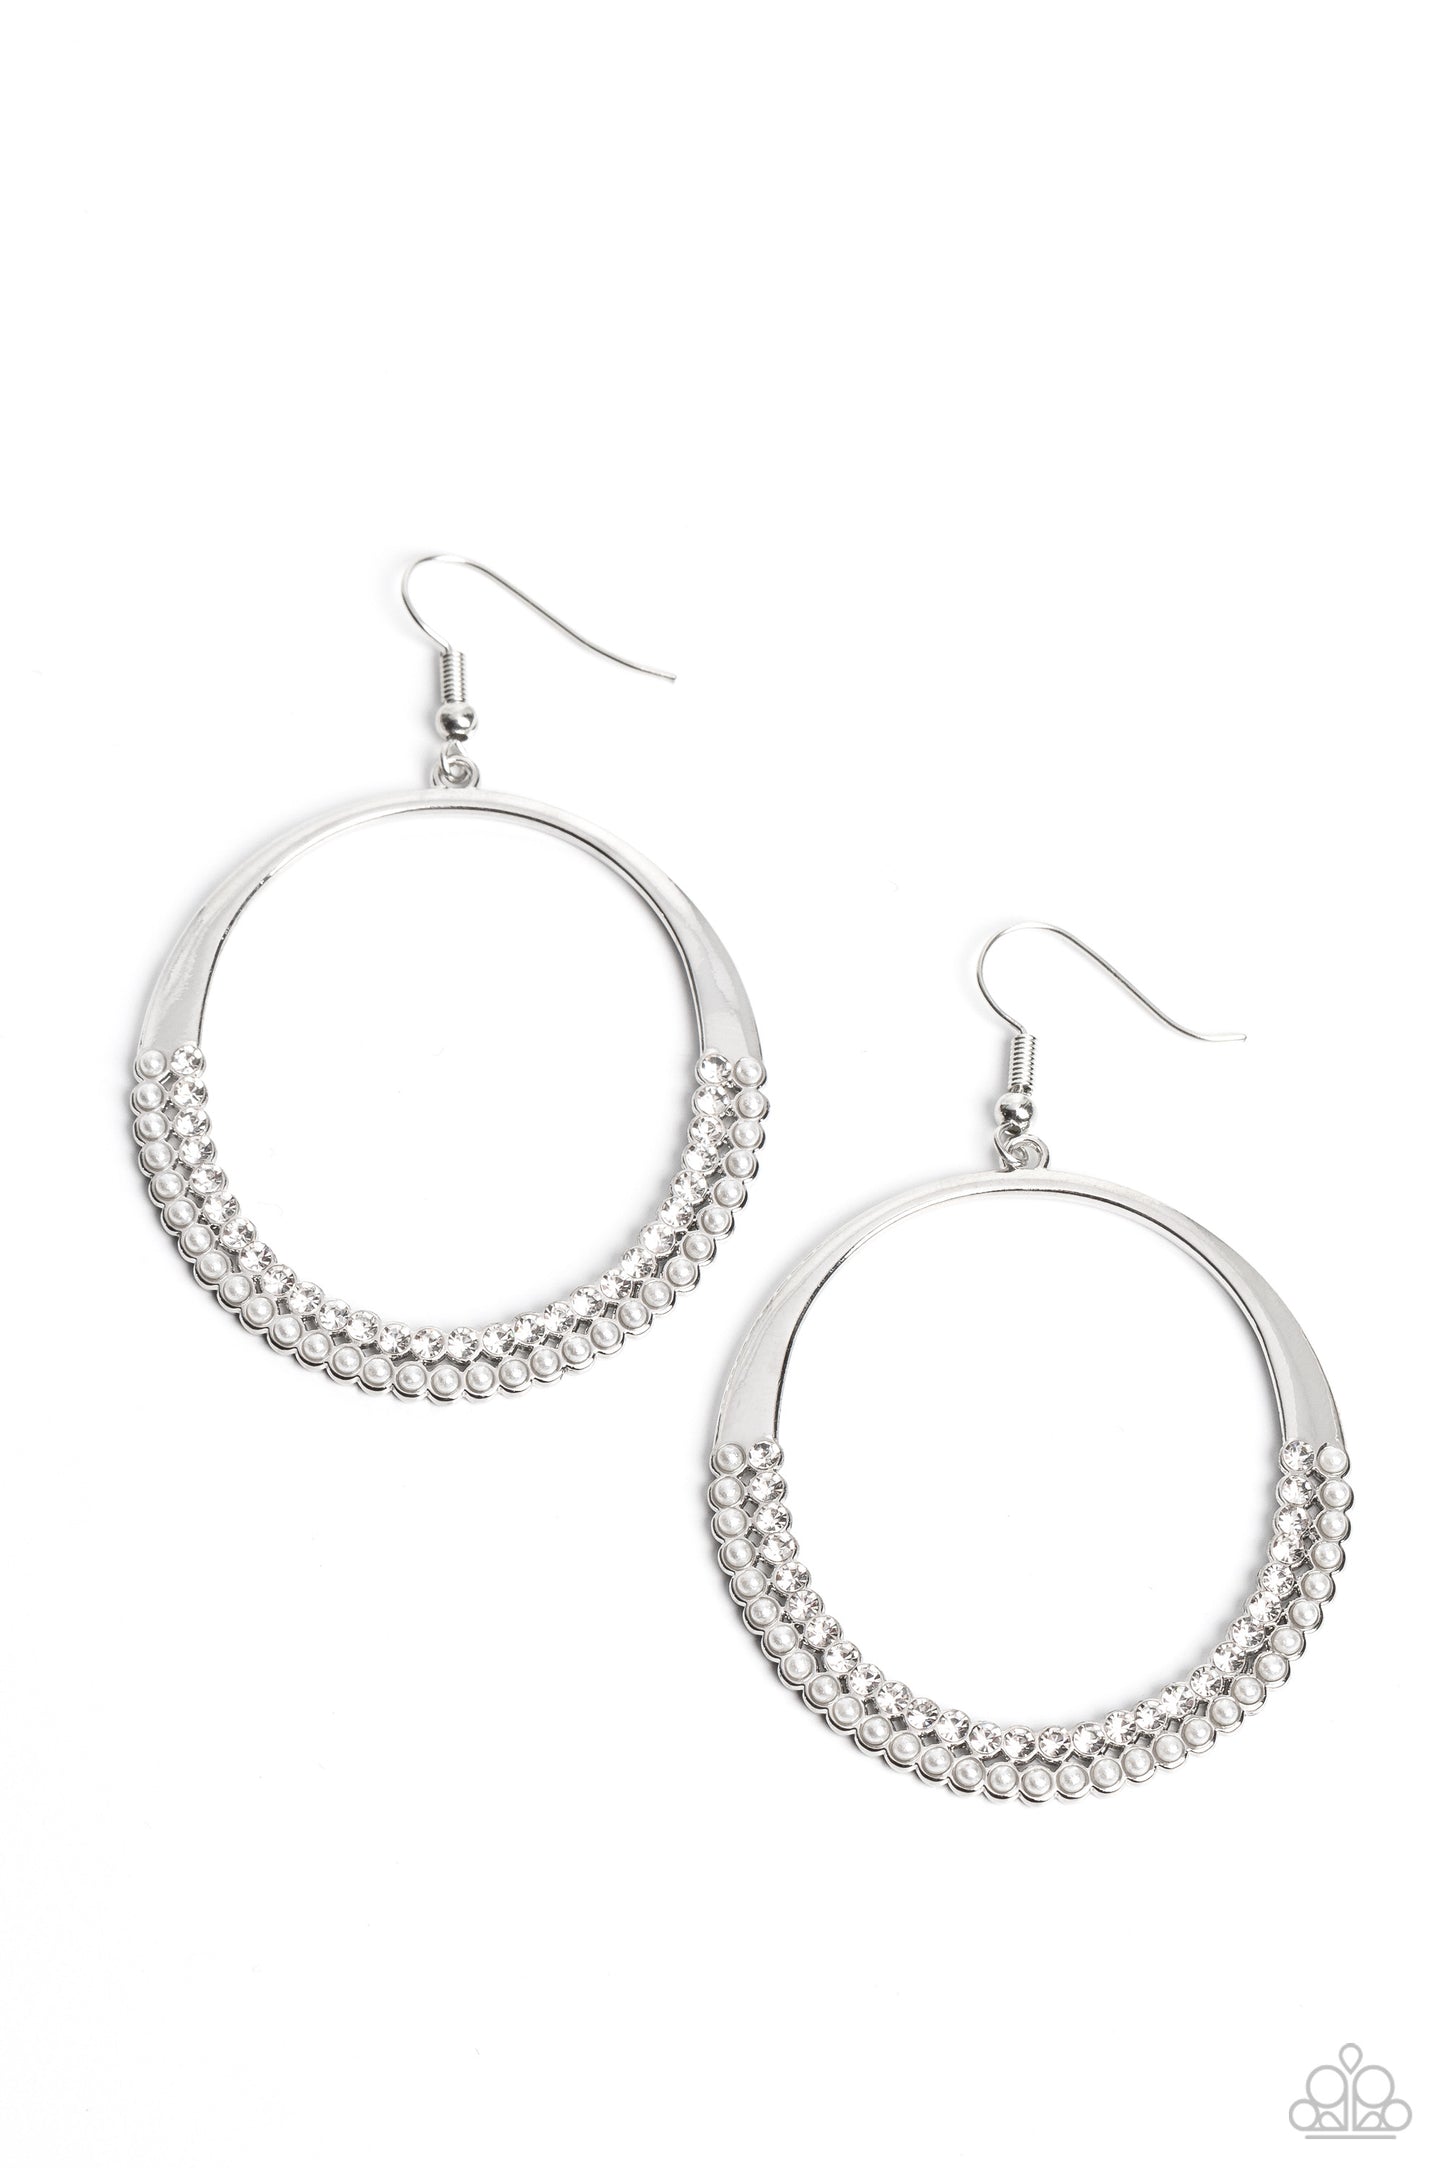 Paparazzi Material PEARL - White Earrings -Paparazzi Jewelry Images